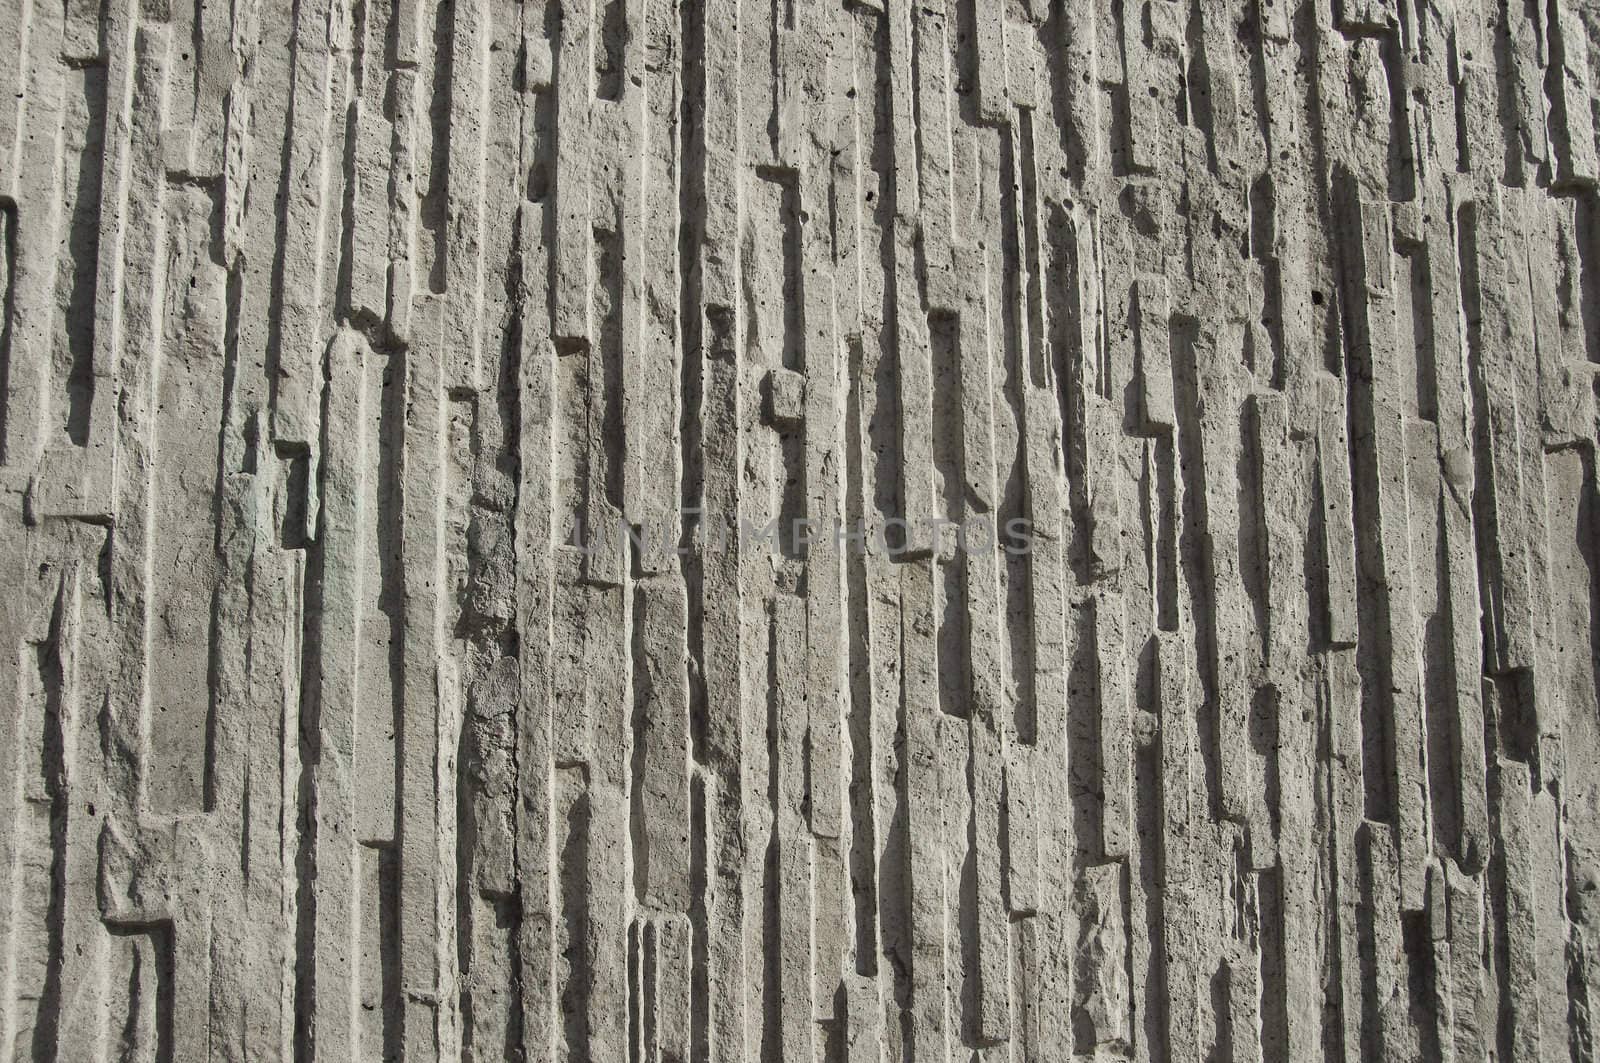 Cement Textured Wall by peterboxy